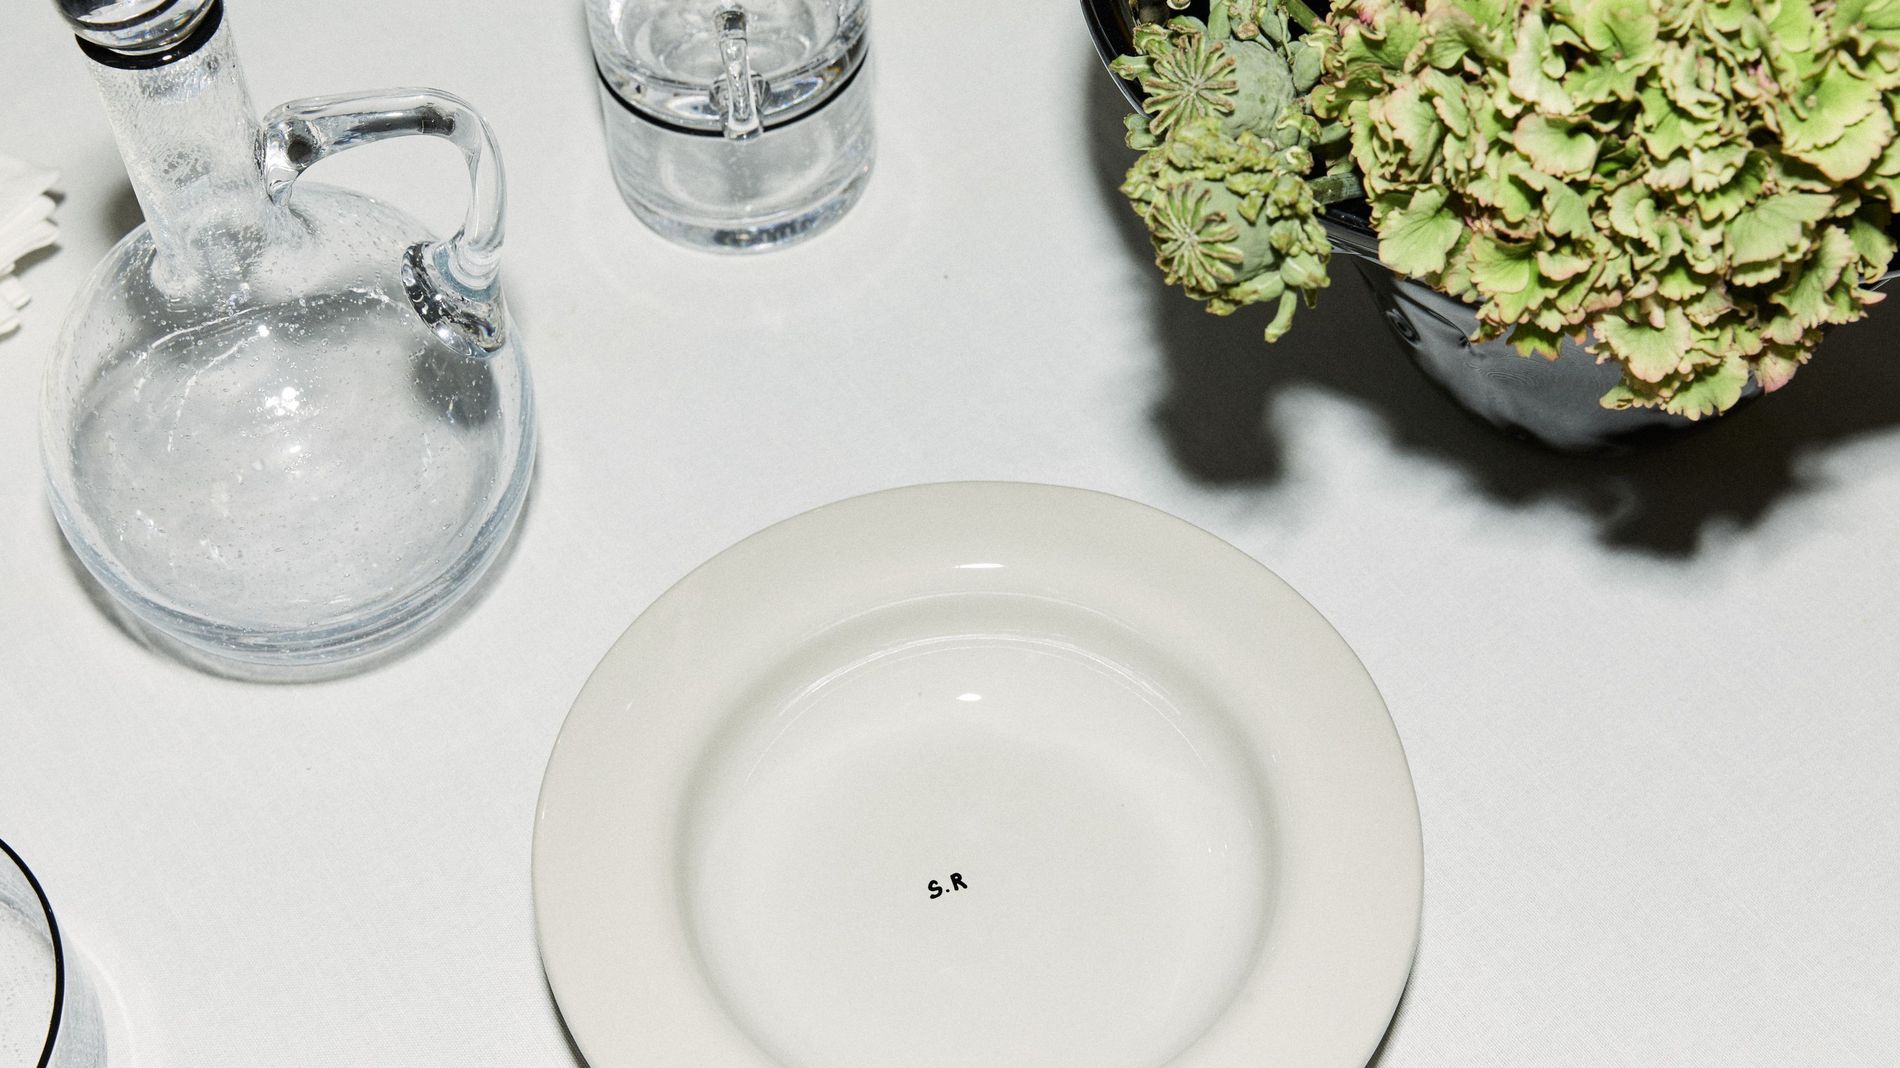 Table scape of Sophia Roe's interior collaboration, highlighting the S.R plate